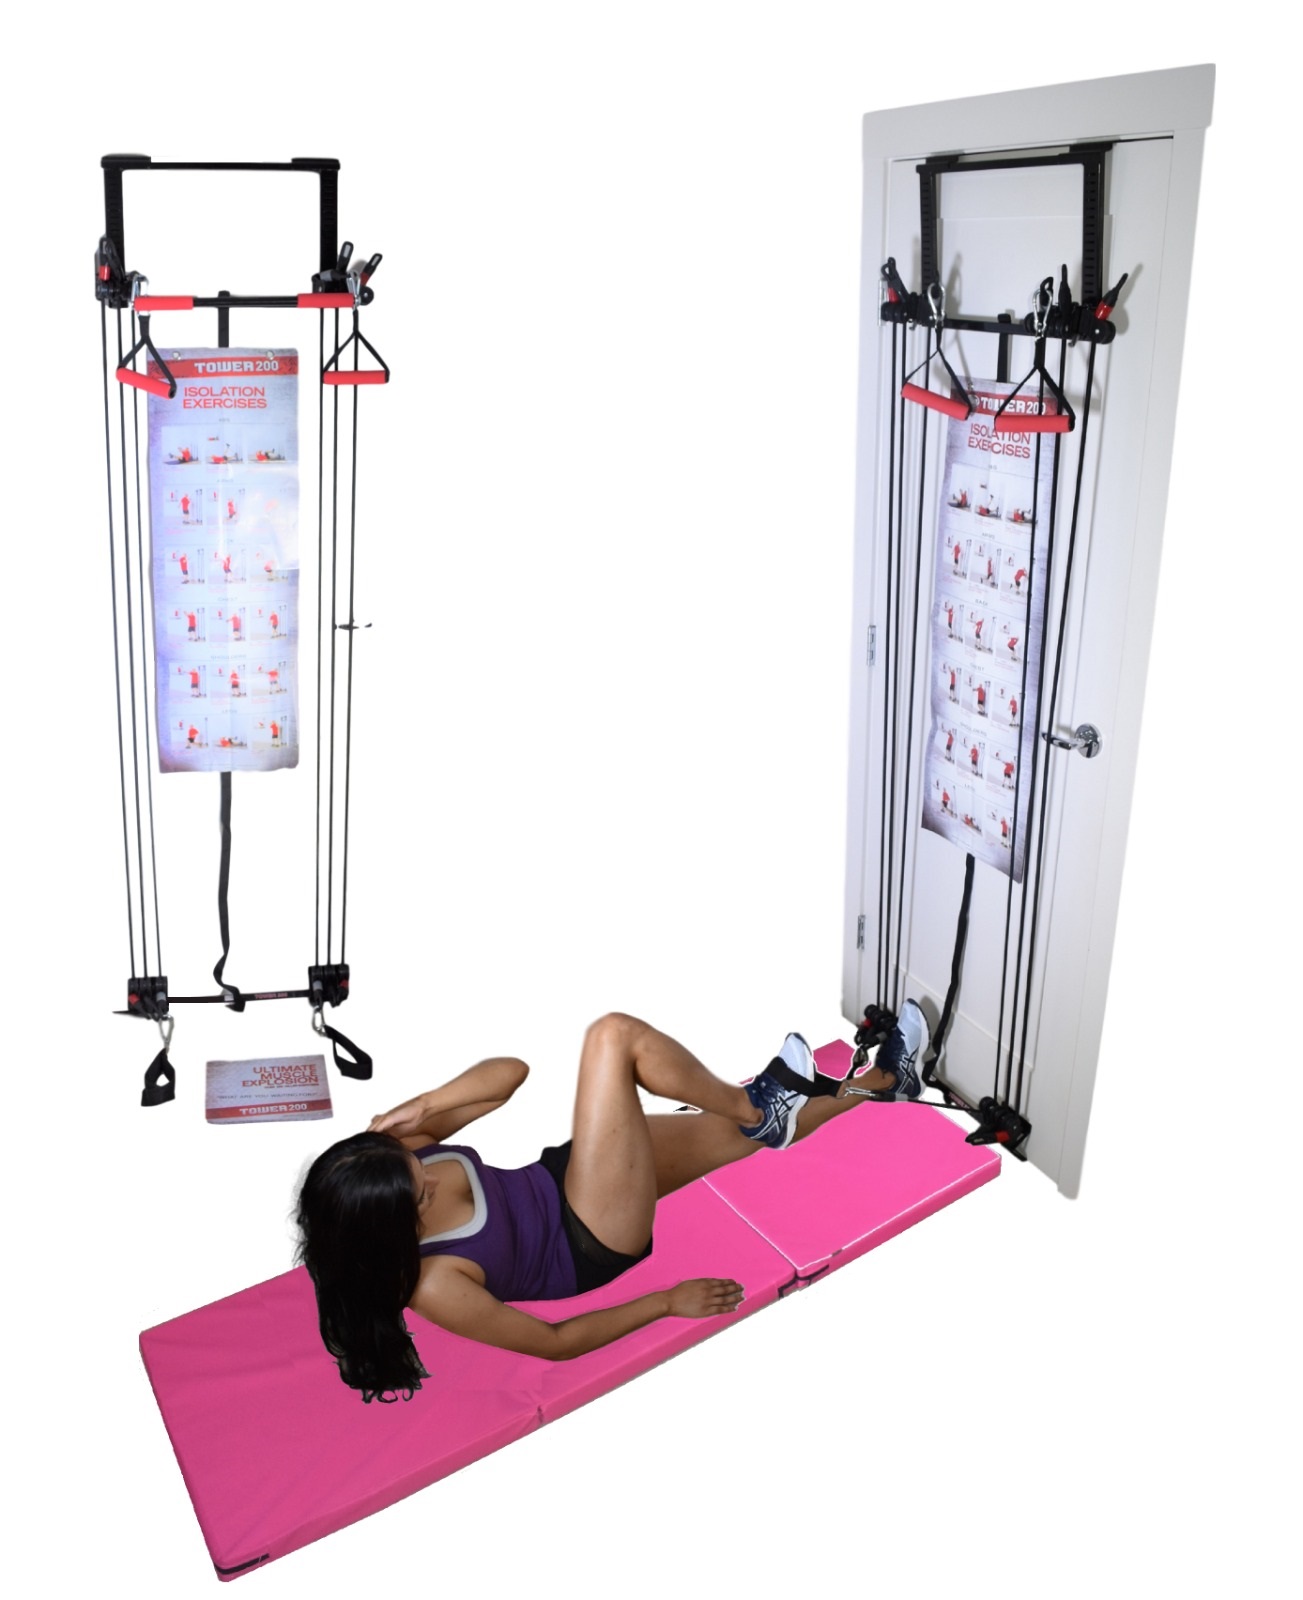 Tower 200 Door Gym Full Body Exercise Fitness Total Home Gym with 6'x2' Exercise Mat Workout System Strength Training with Straight Resistance Bar, DVD, Exercise Chart - image 1 of 13